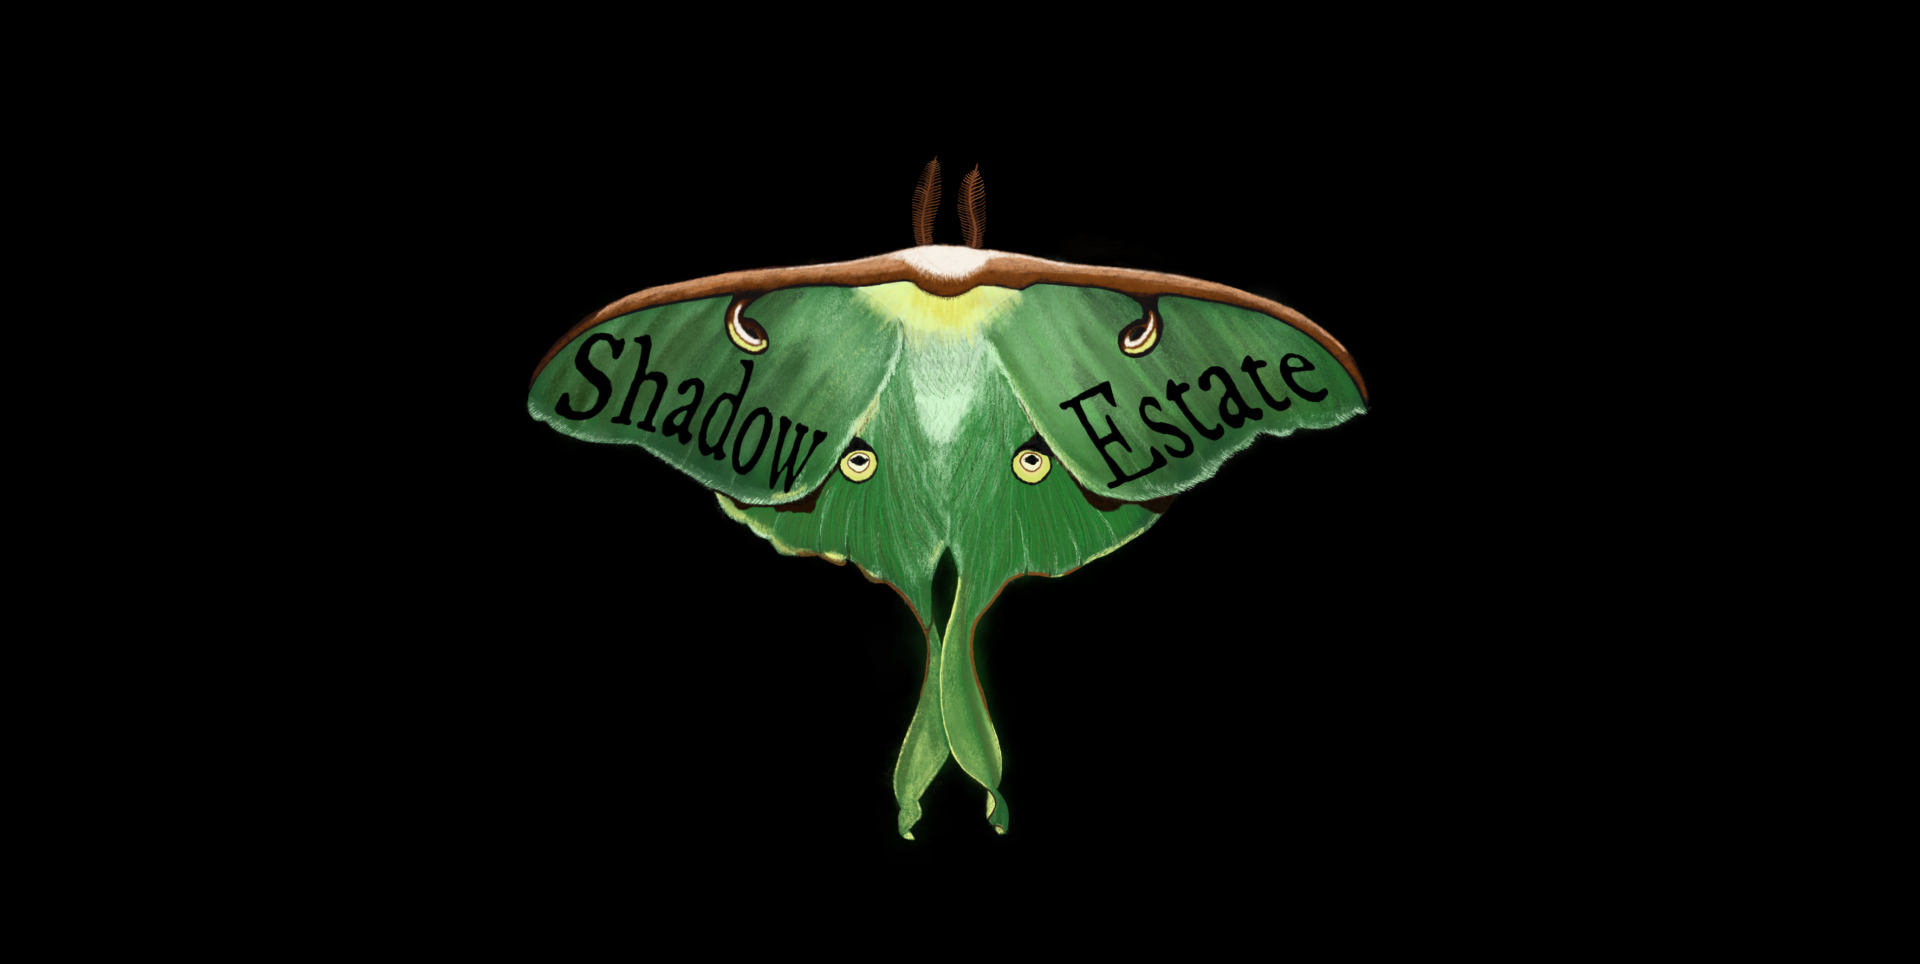 Luna moth with wings wide with Shadow Estate text on the wings.